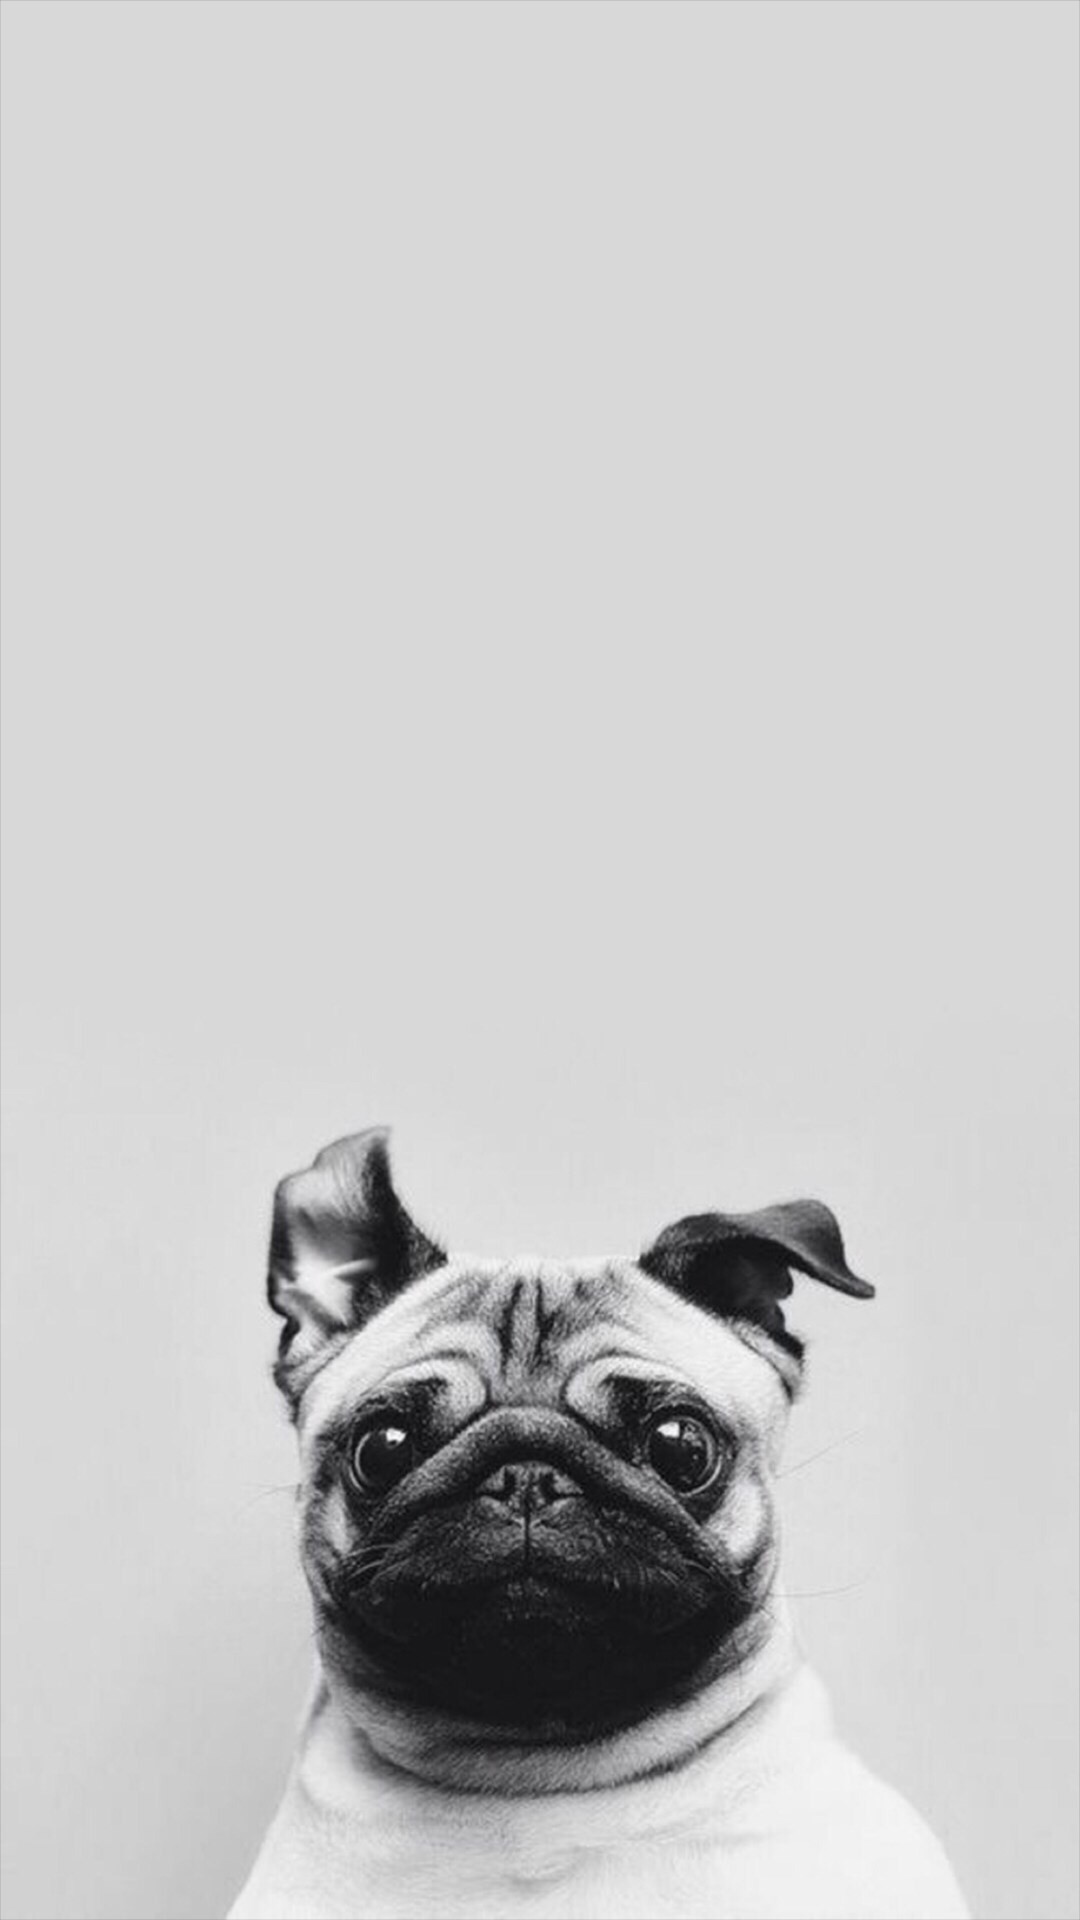 1080x1920 ... funny puppy dog simple macro iphone 8 wallpaper download iphone ...